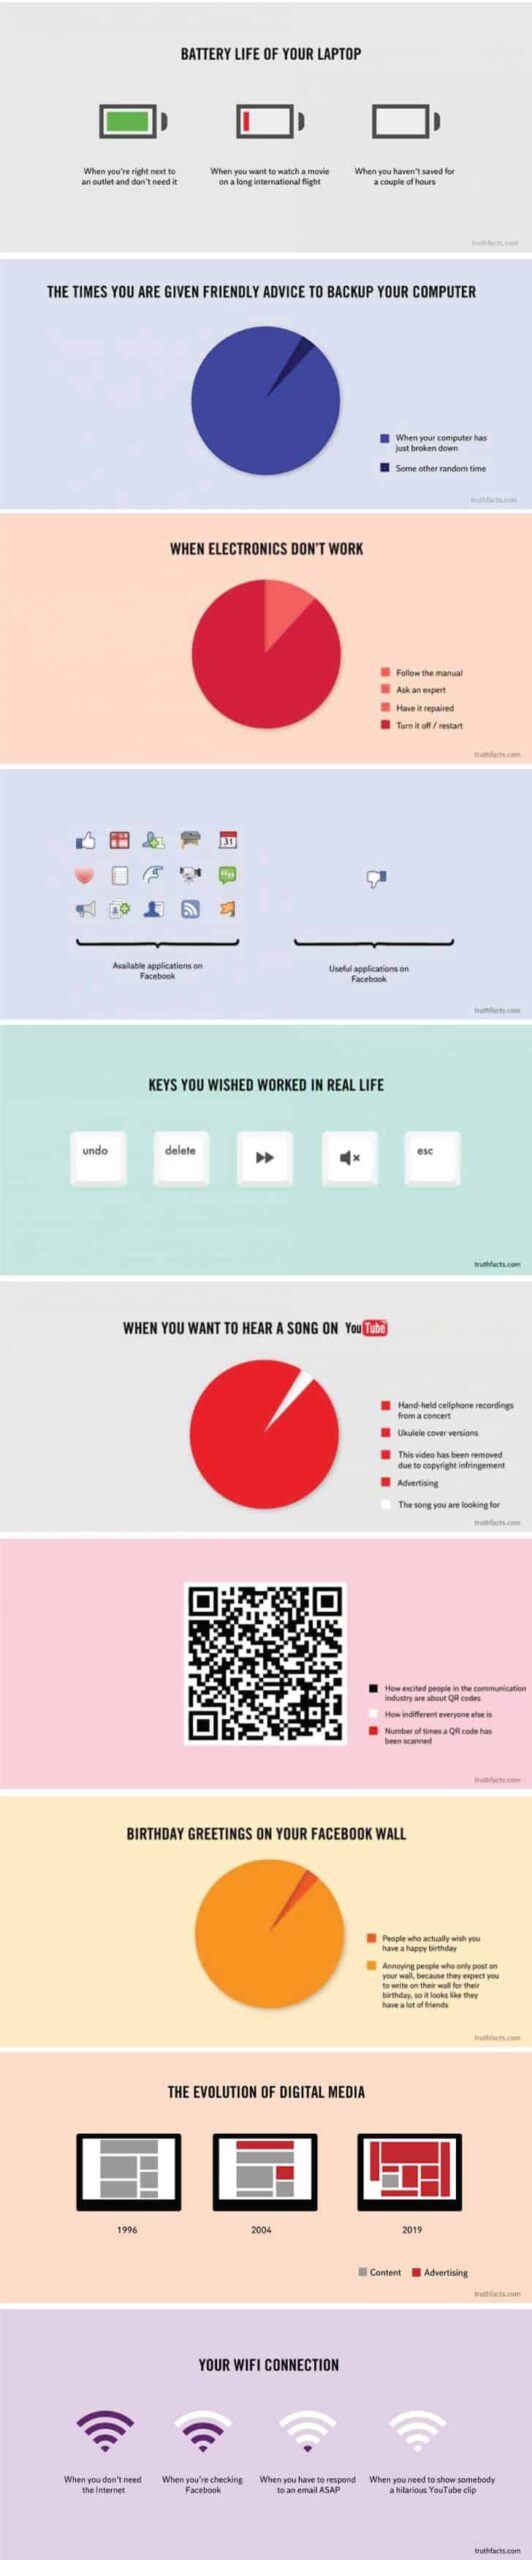 16 Funny and Informative Infographics about Design - Creative Market Blog